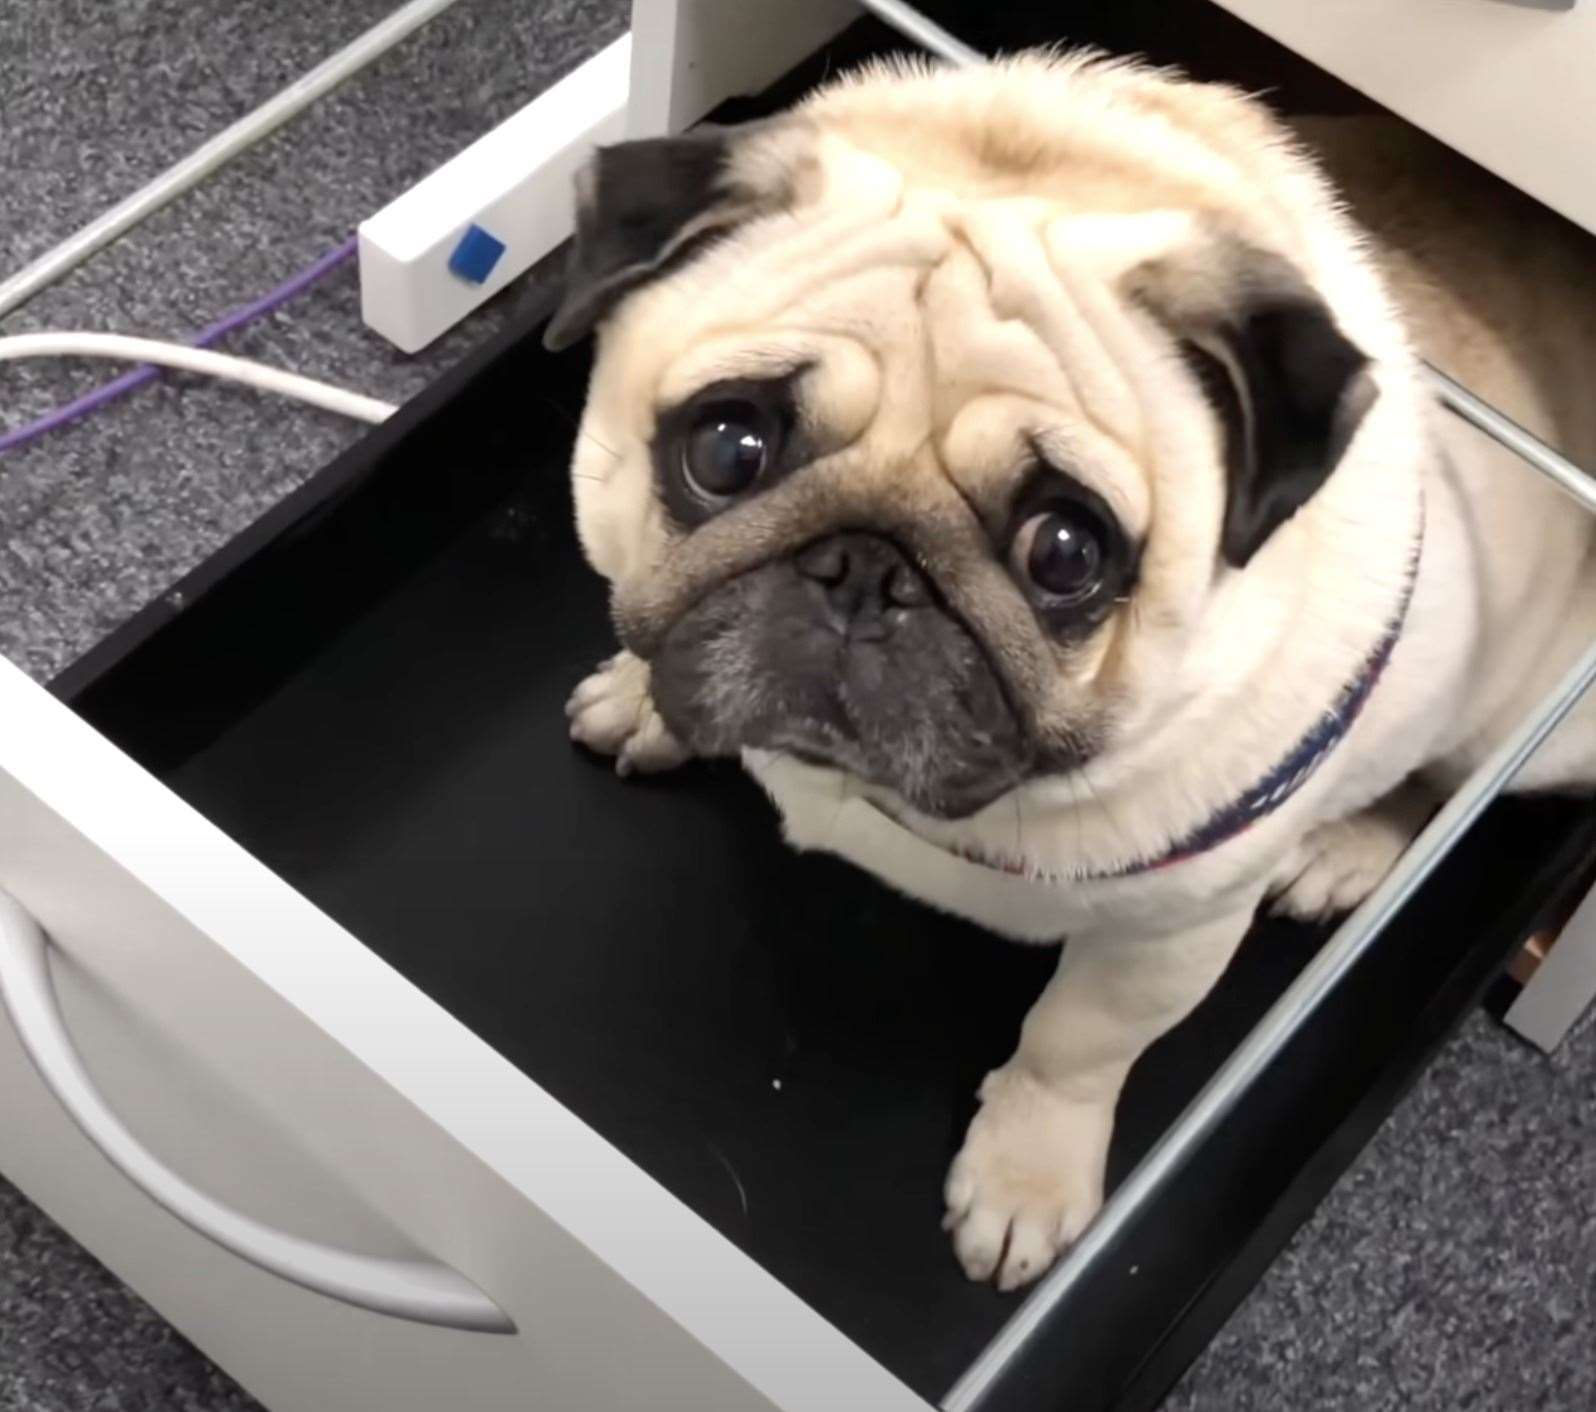 He became an internet sensation when a video of him in a drawer went viral. Picture: @thepuggysmalls